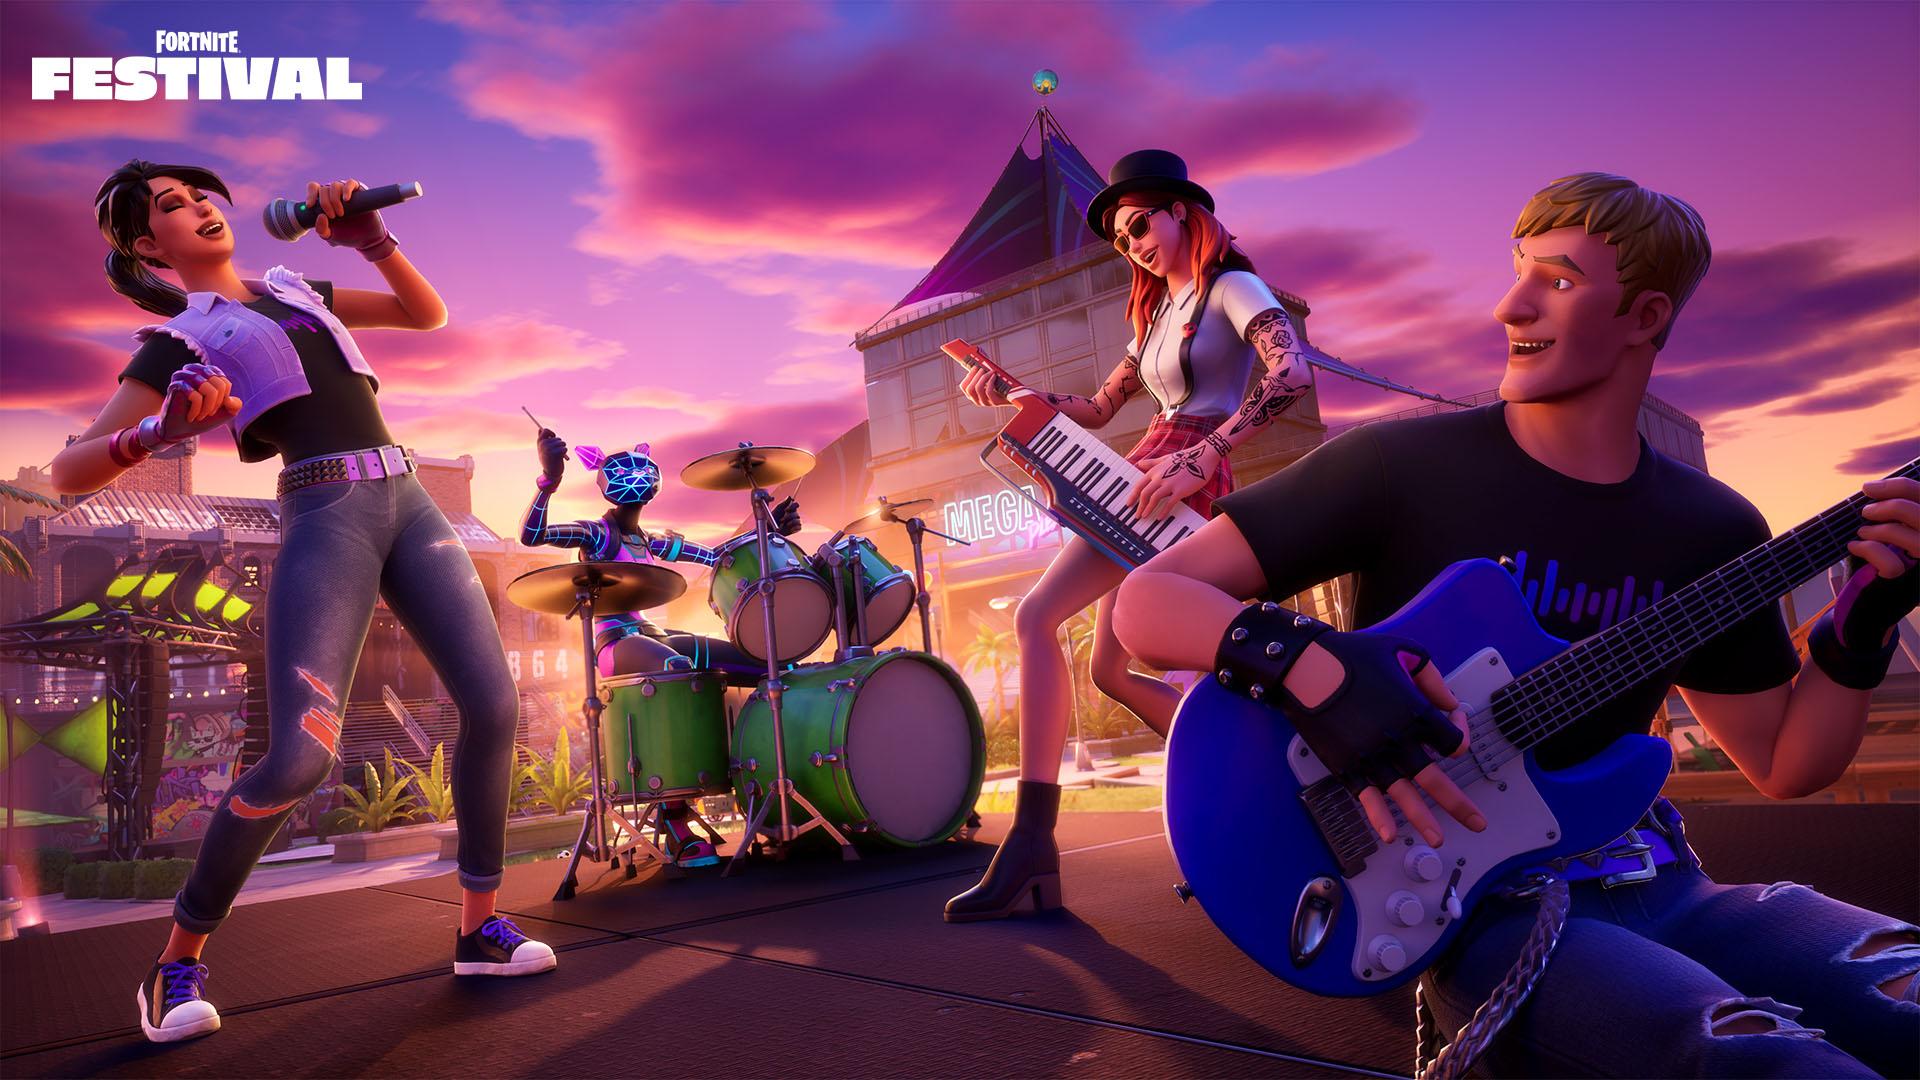 Players can unlock their music and skins by completing challenges.